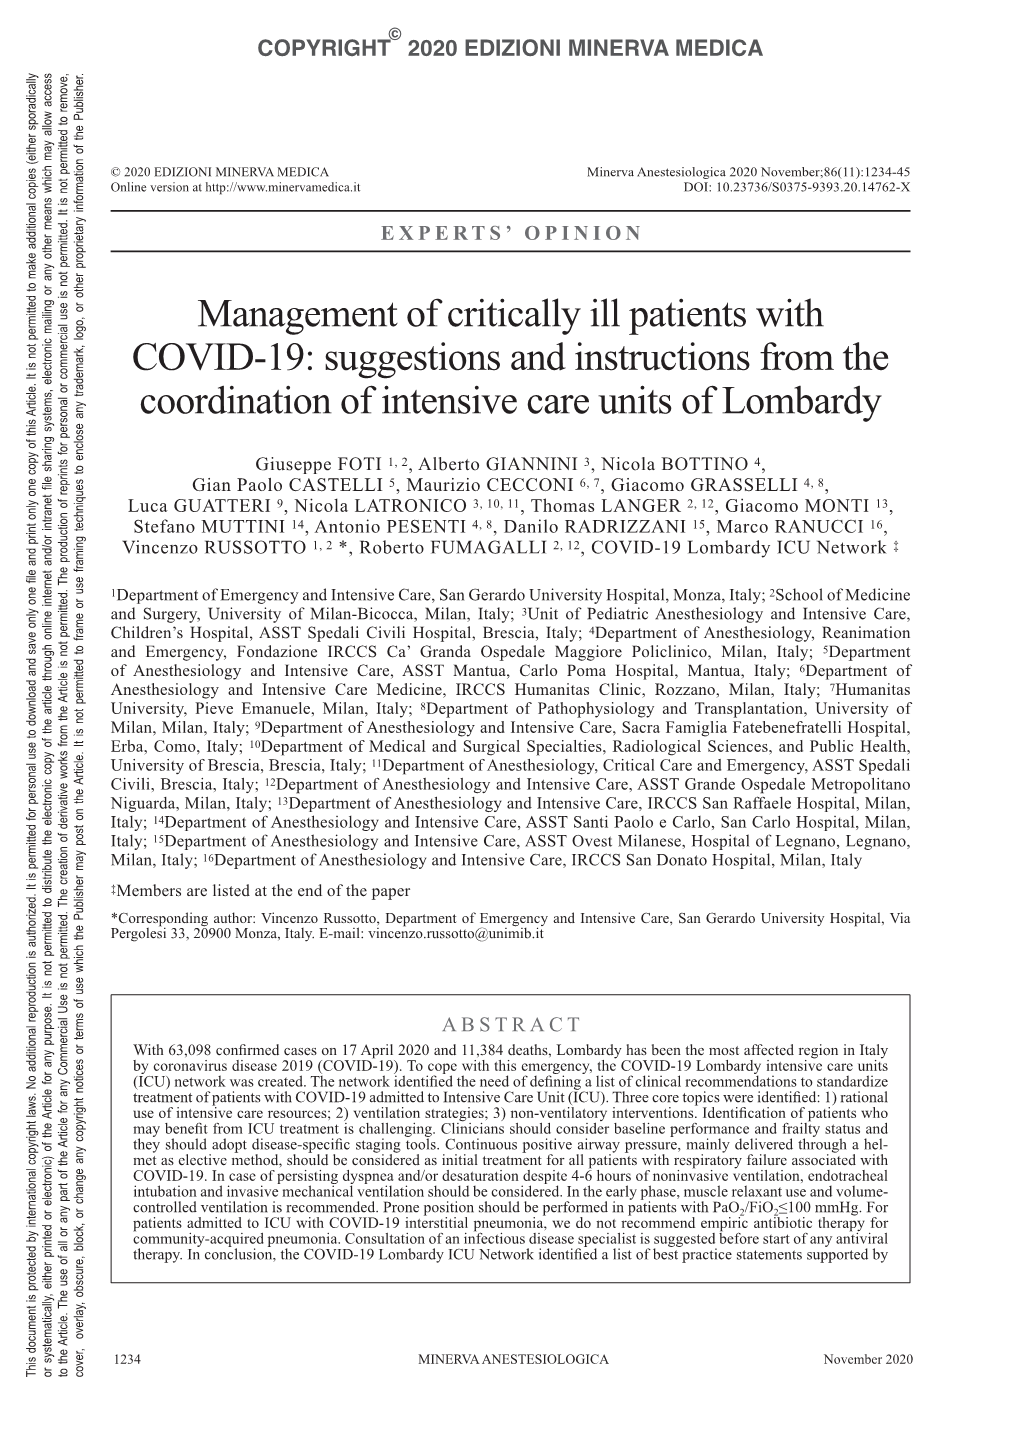 Management of Critically Ill Patients with COVID-19: Suggestions and Instructions from the Coordination of Intensive Care Units of Lombardy